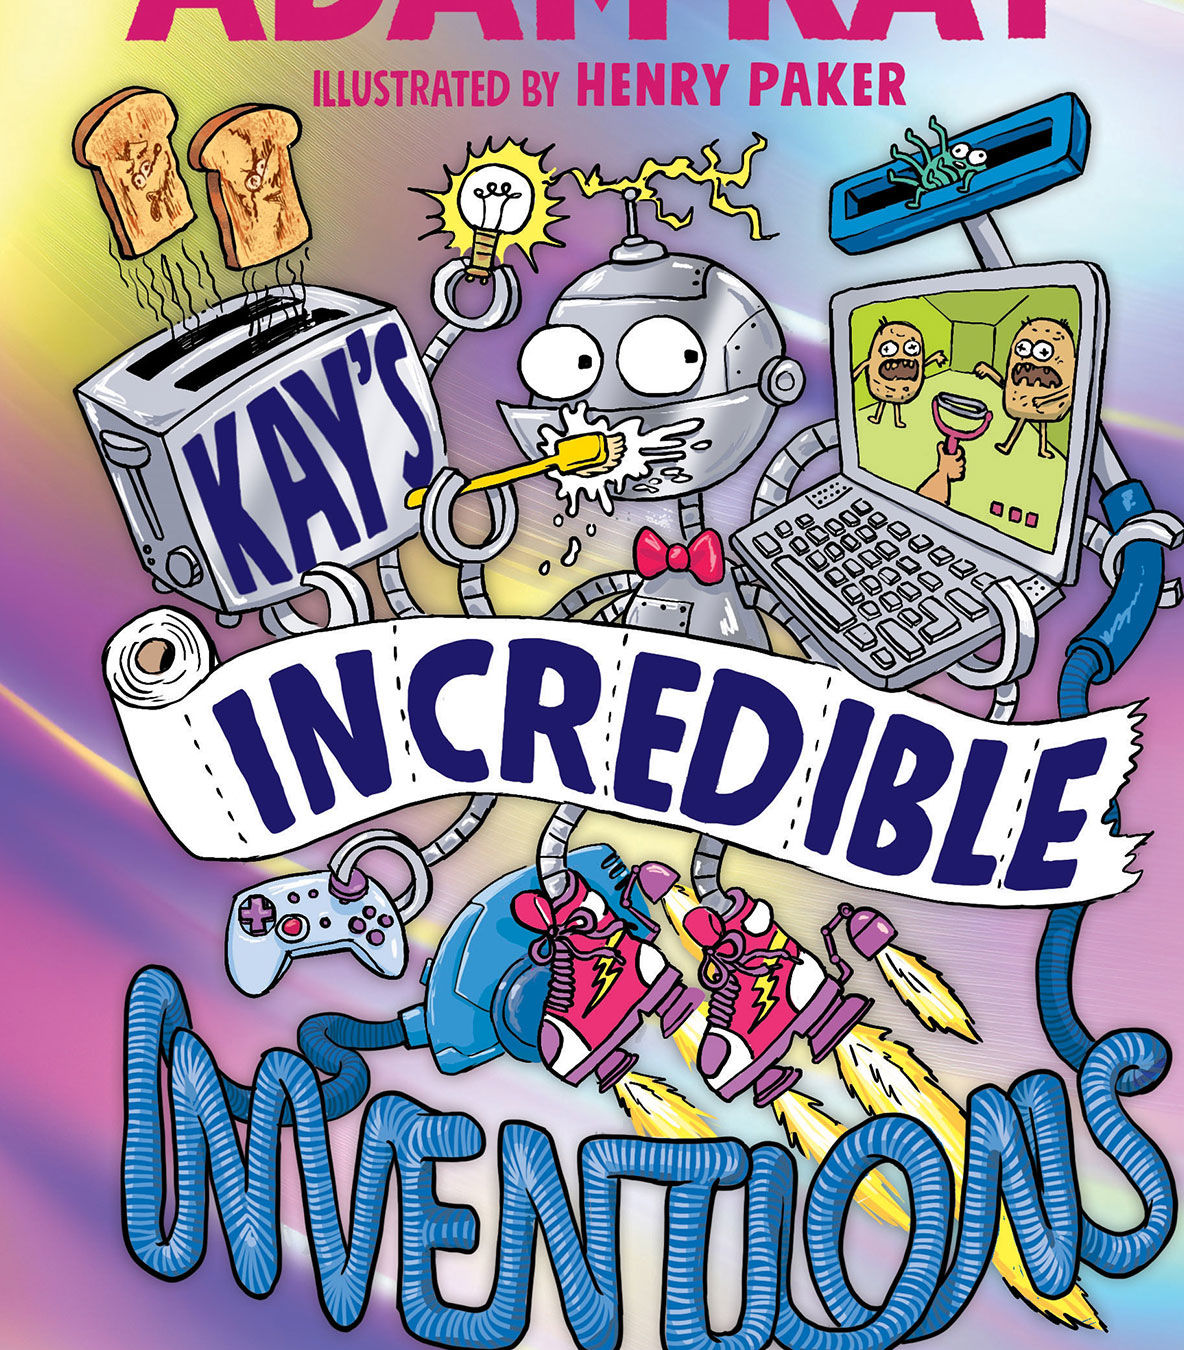 Book jacket for Adam Kay’S INCREDIBLE INVENTIONS. Illustration by HENRY PAKER